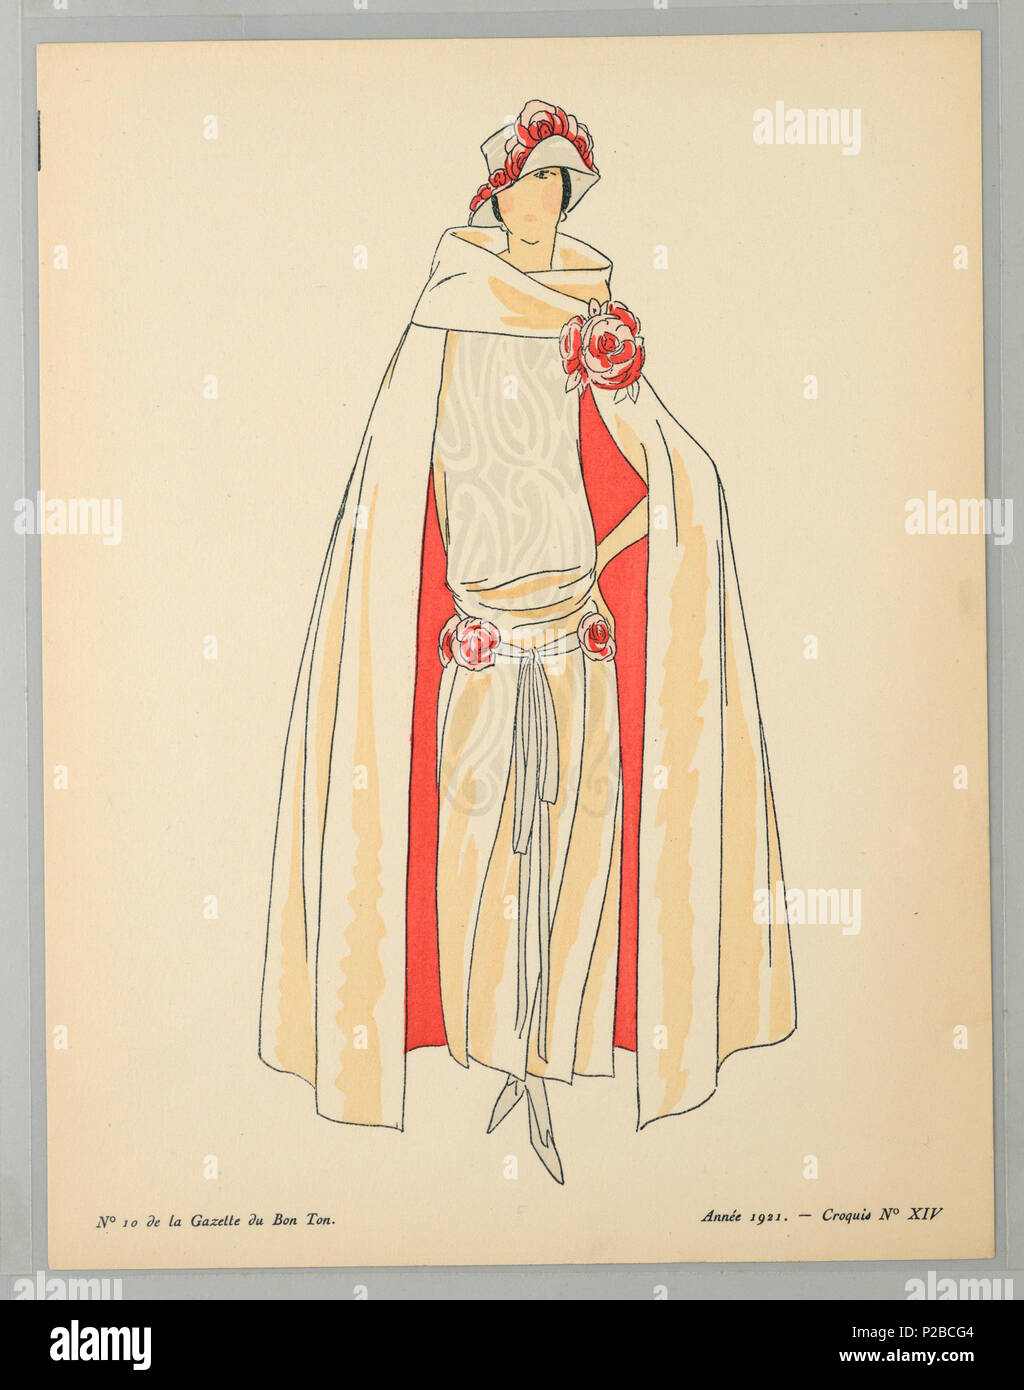 .  English: Print, Sketch No. XIV, from La Gazette du Bon Ton, No. 10, 1921 .  English: Center woman stands draped in a cream cape with pink lining, the thick cowl neck collar is clasped by a rose. Underneath she wears a matching drop waist dress with rose decorated sash and hat. . 1921 269 Print, Sketch No. XIV, from La Gazette du Bon Ton, No. 10, 1921 (CH 18614957) Stock Photo